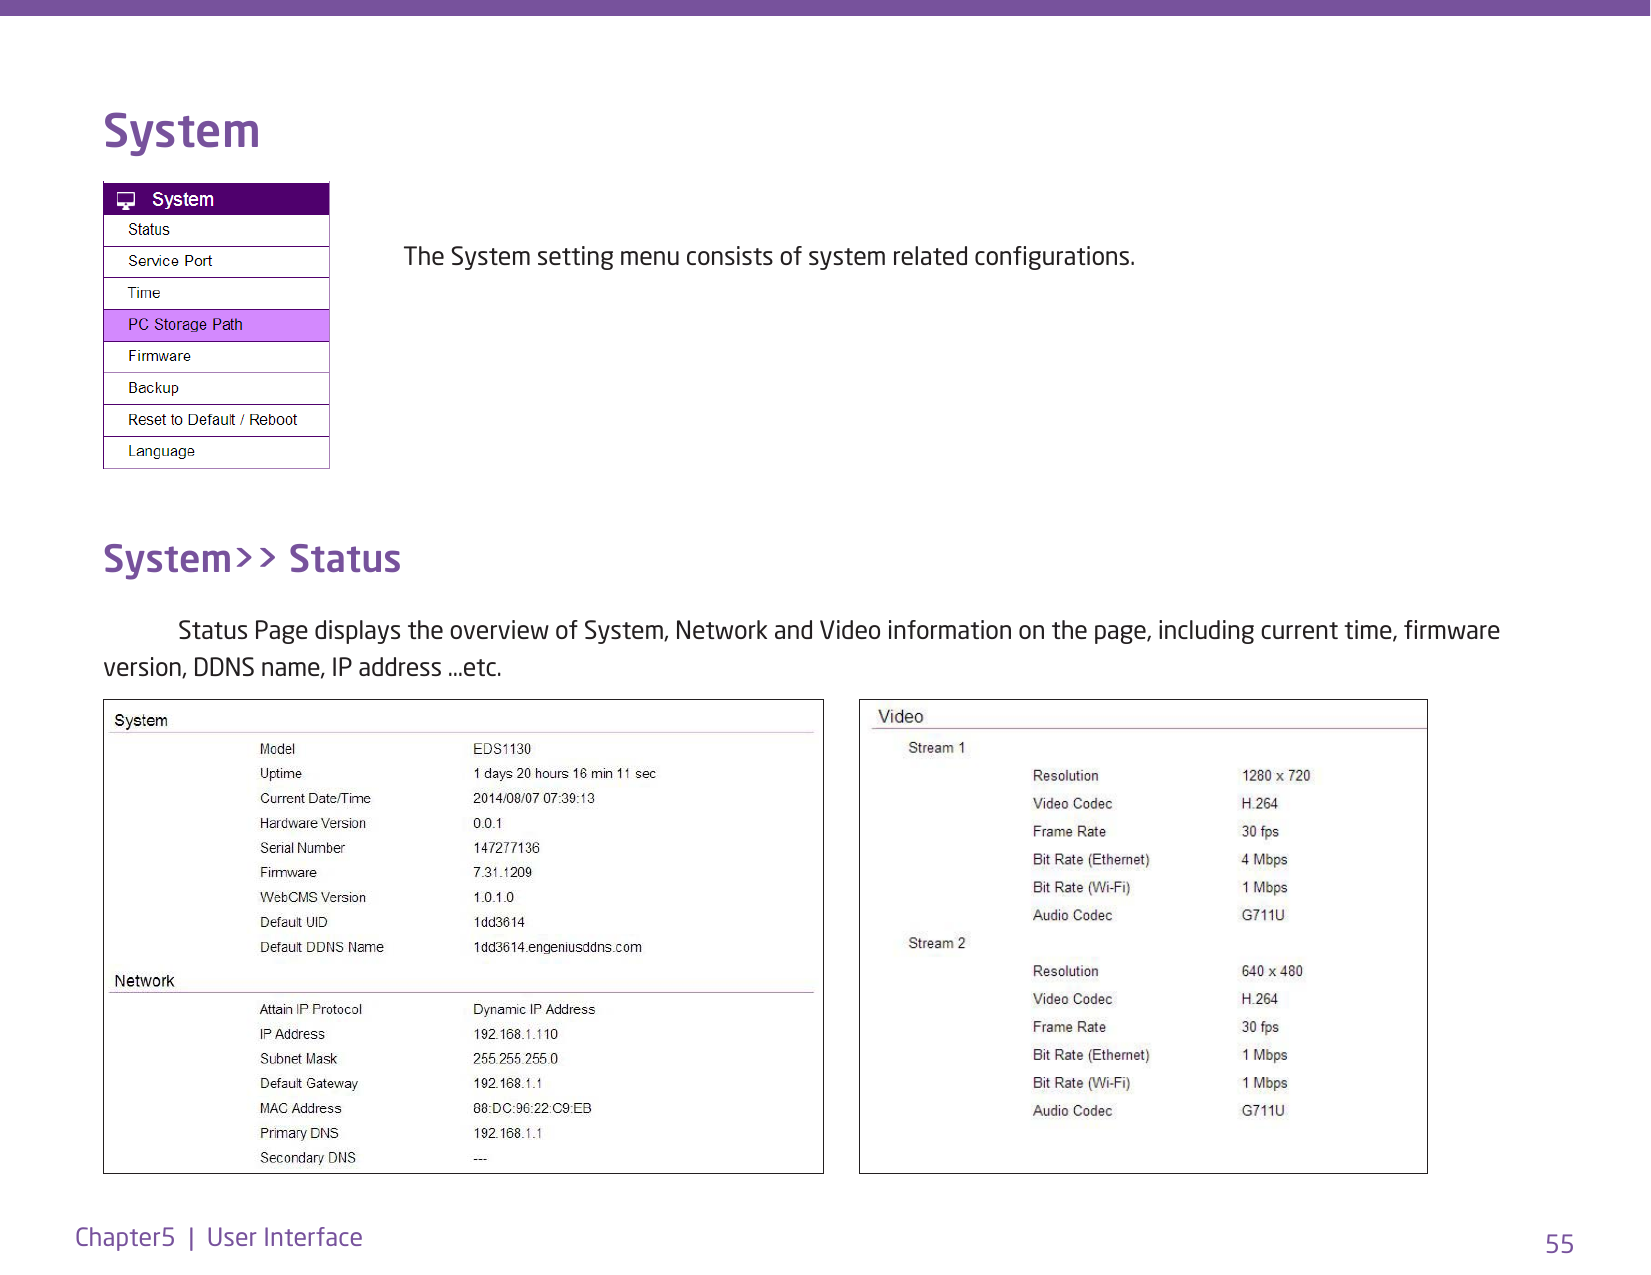 55Chapter5  |  User InterfaceSystem  The System setting menu consists of system related congurations. System&gt;&gt; Status  Status Page displays the overview of System, Network and Video information on the page, including current time, rmware version, DDNS name, IP address …etc.